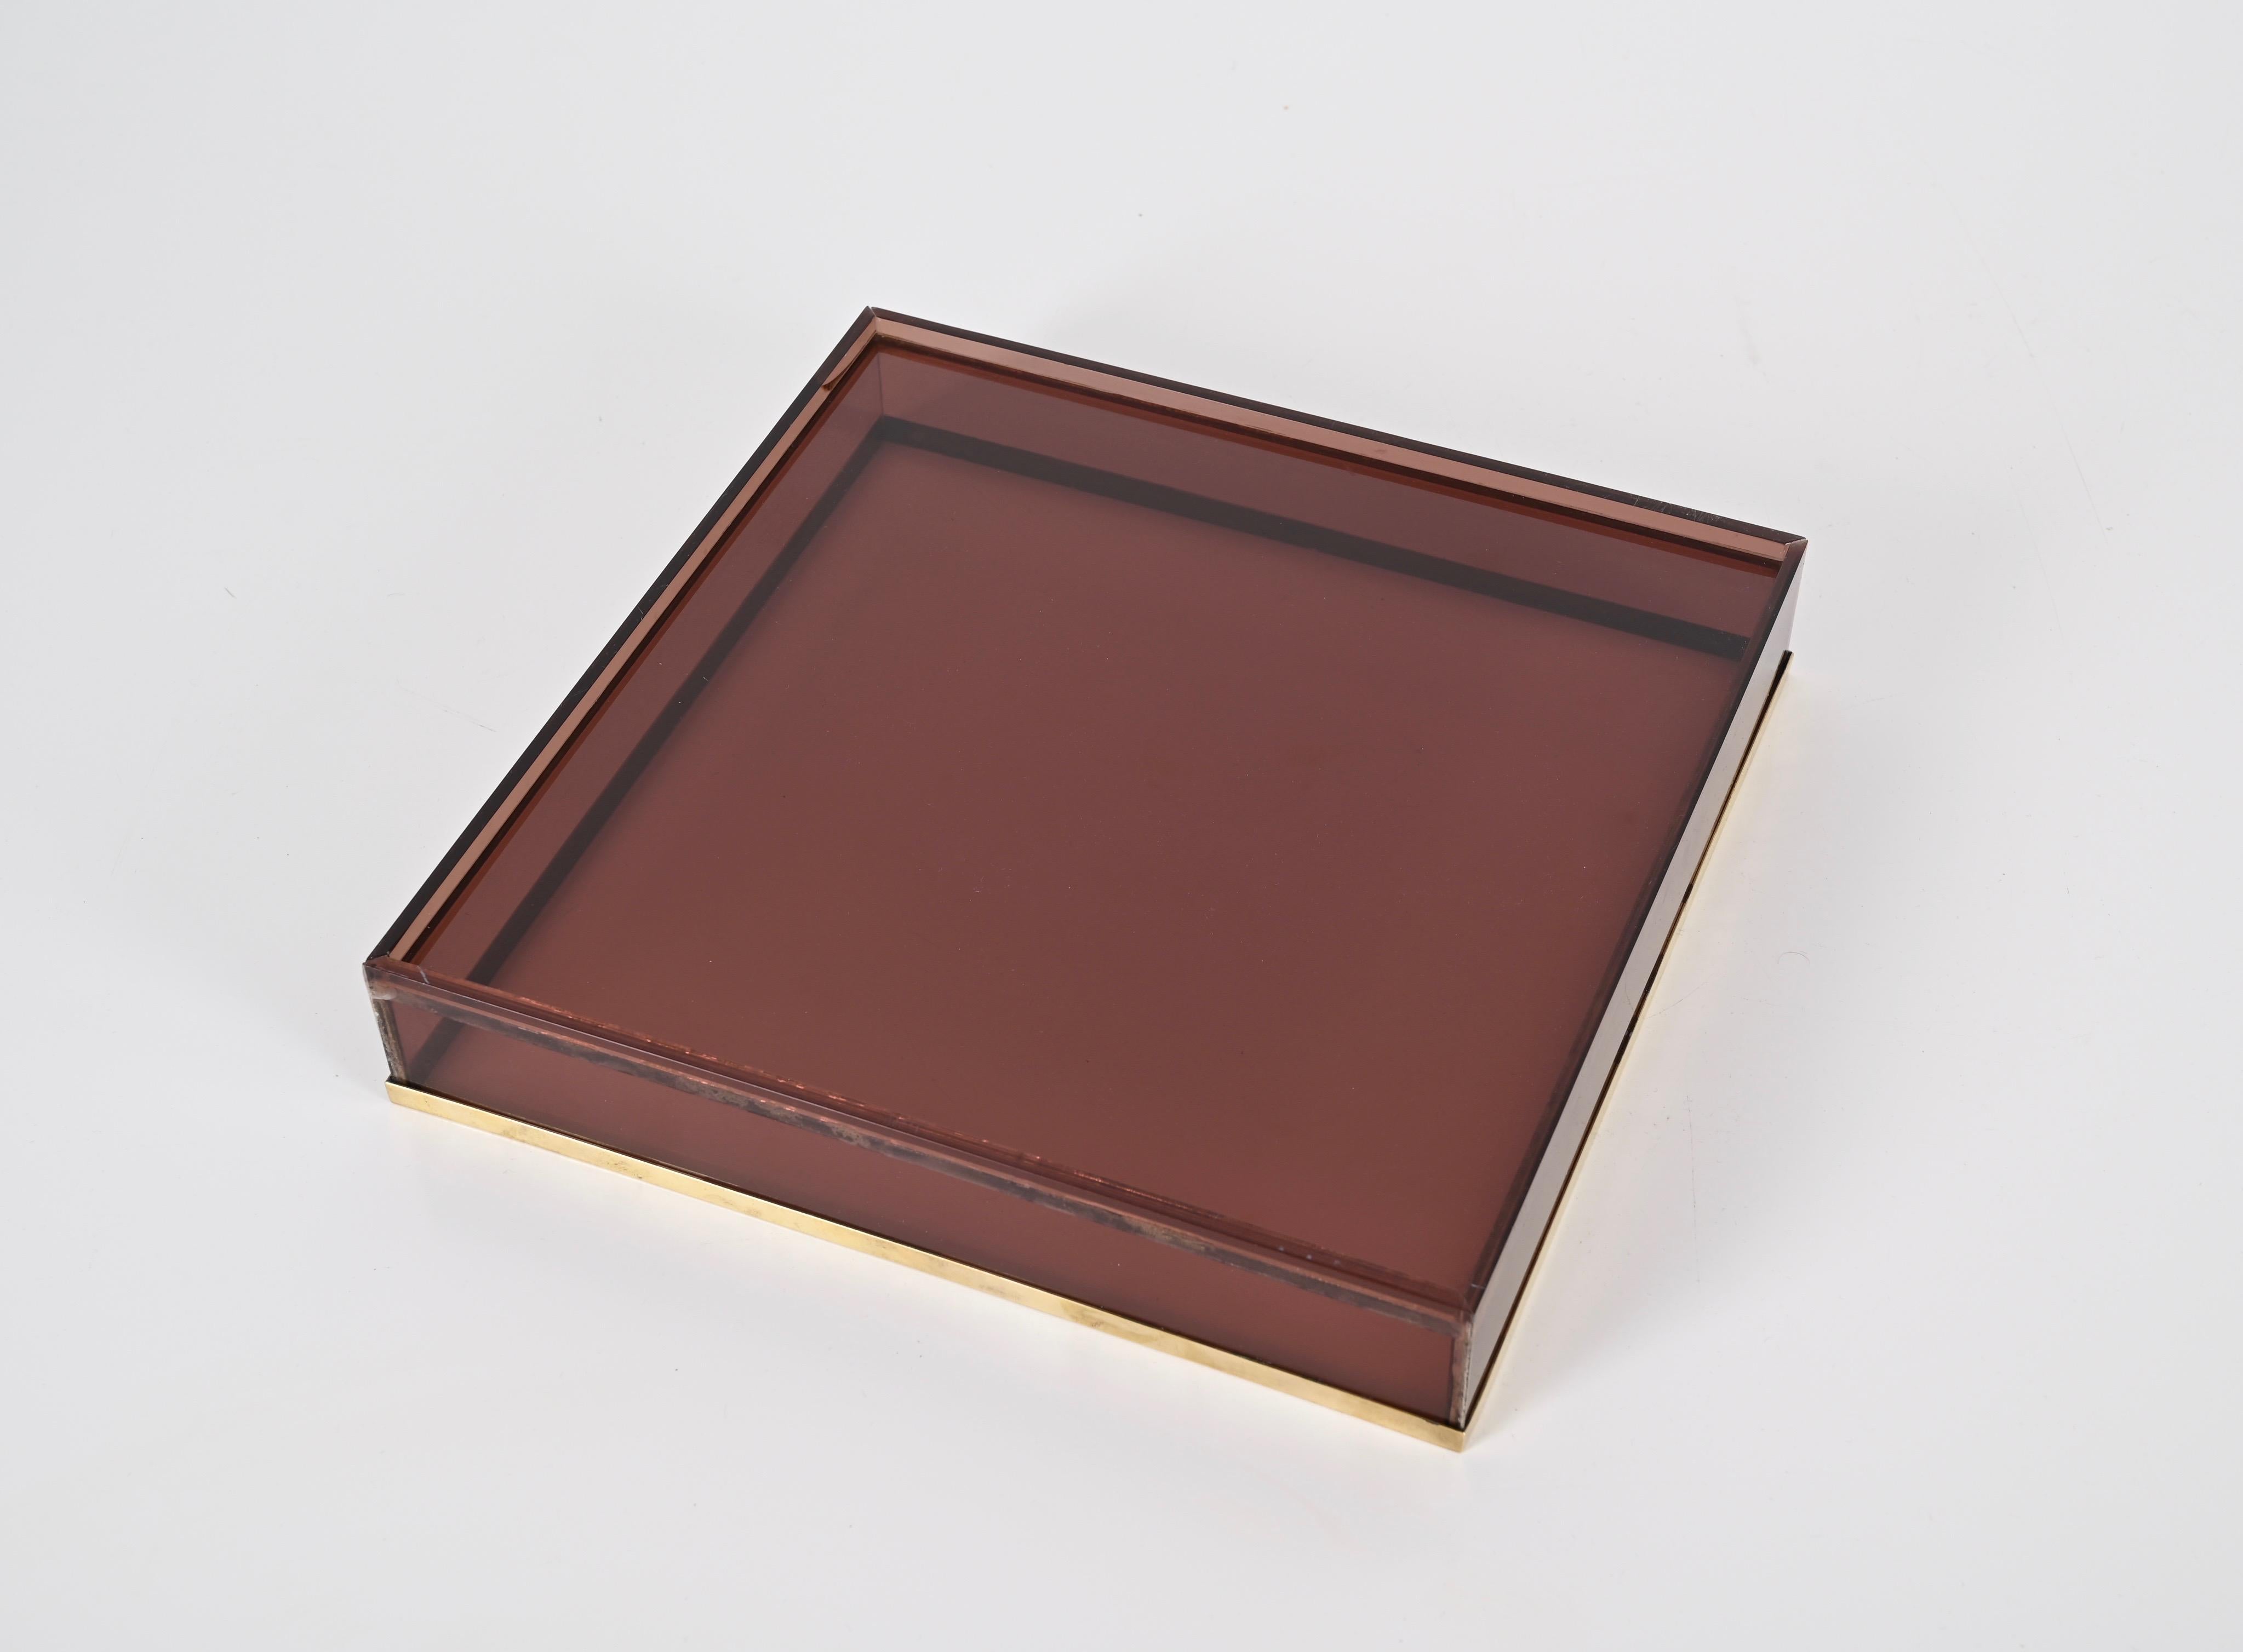 Willy Rizzo Midcentury Pink Lucite and Brass Italian Square Serving Tray, 1970s For Sale 8